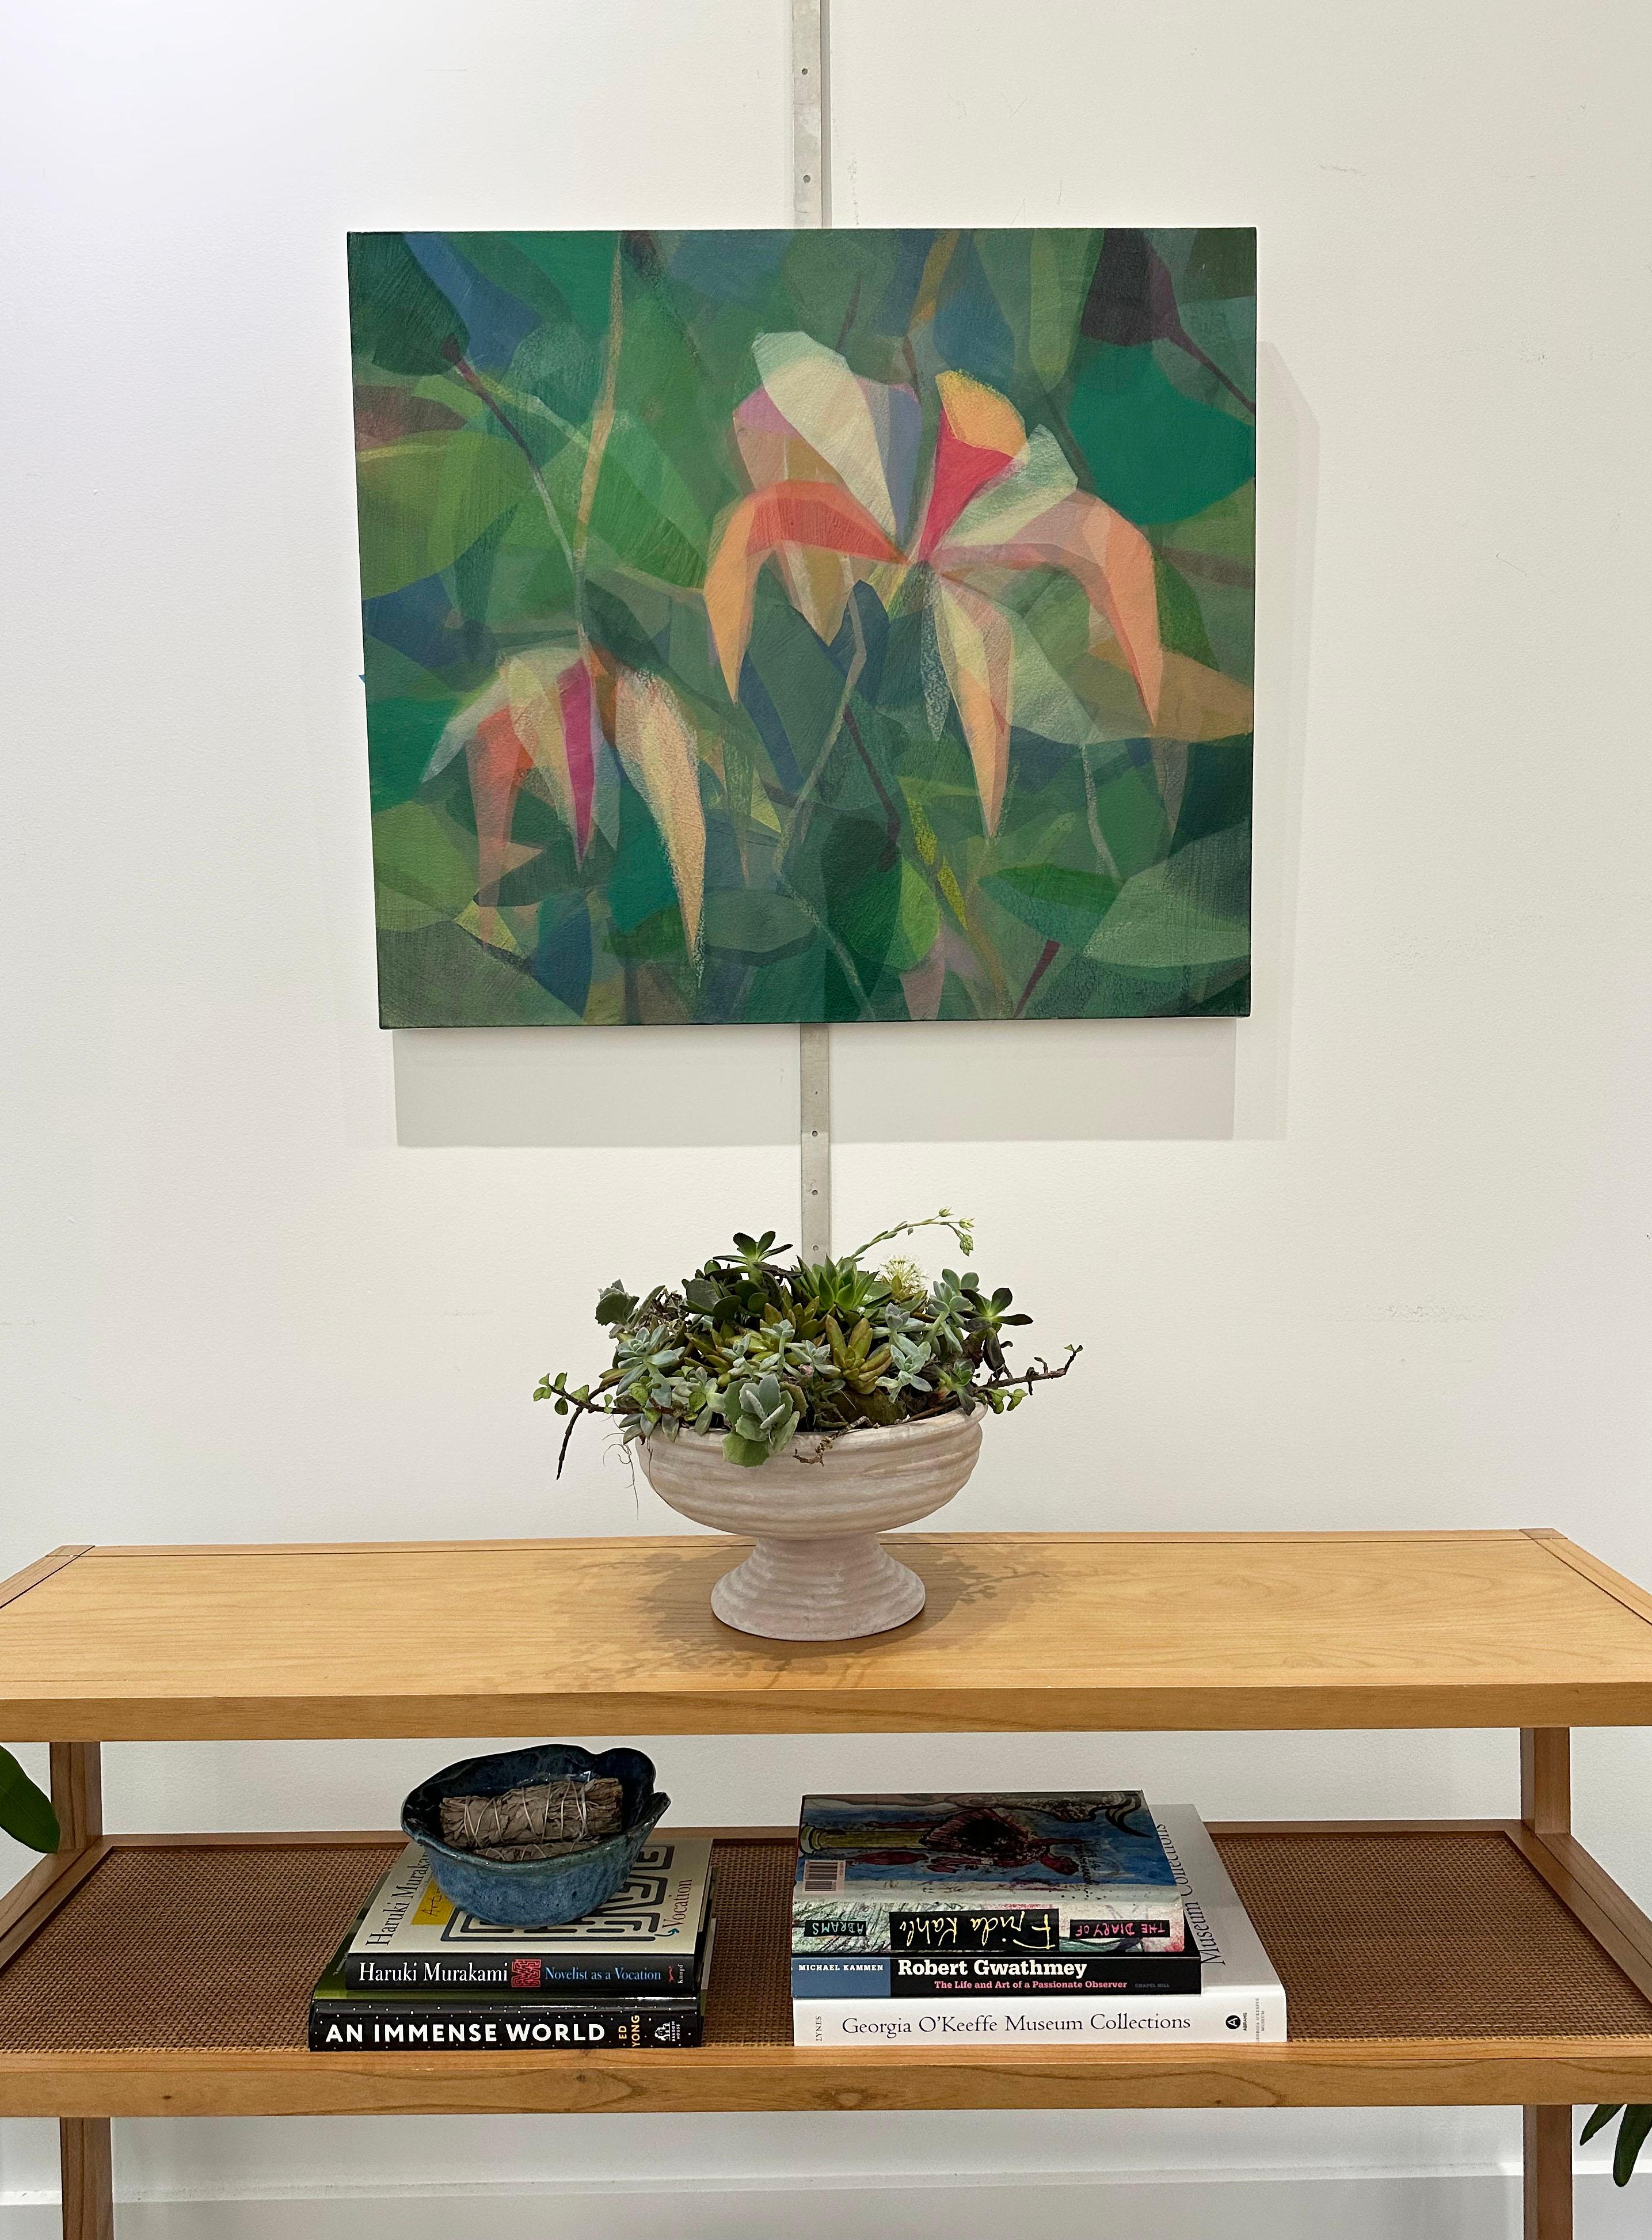 This painting is an abstract landscape on canvas featuring vibrant and dark layers of green, yellow, orange and pink.

Katherine Sandoz is inspired by the work of Helen Frankenthaler, Richard Diebenkorn, Morris Louis, Vincent Van Gogh, Willem de